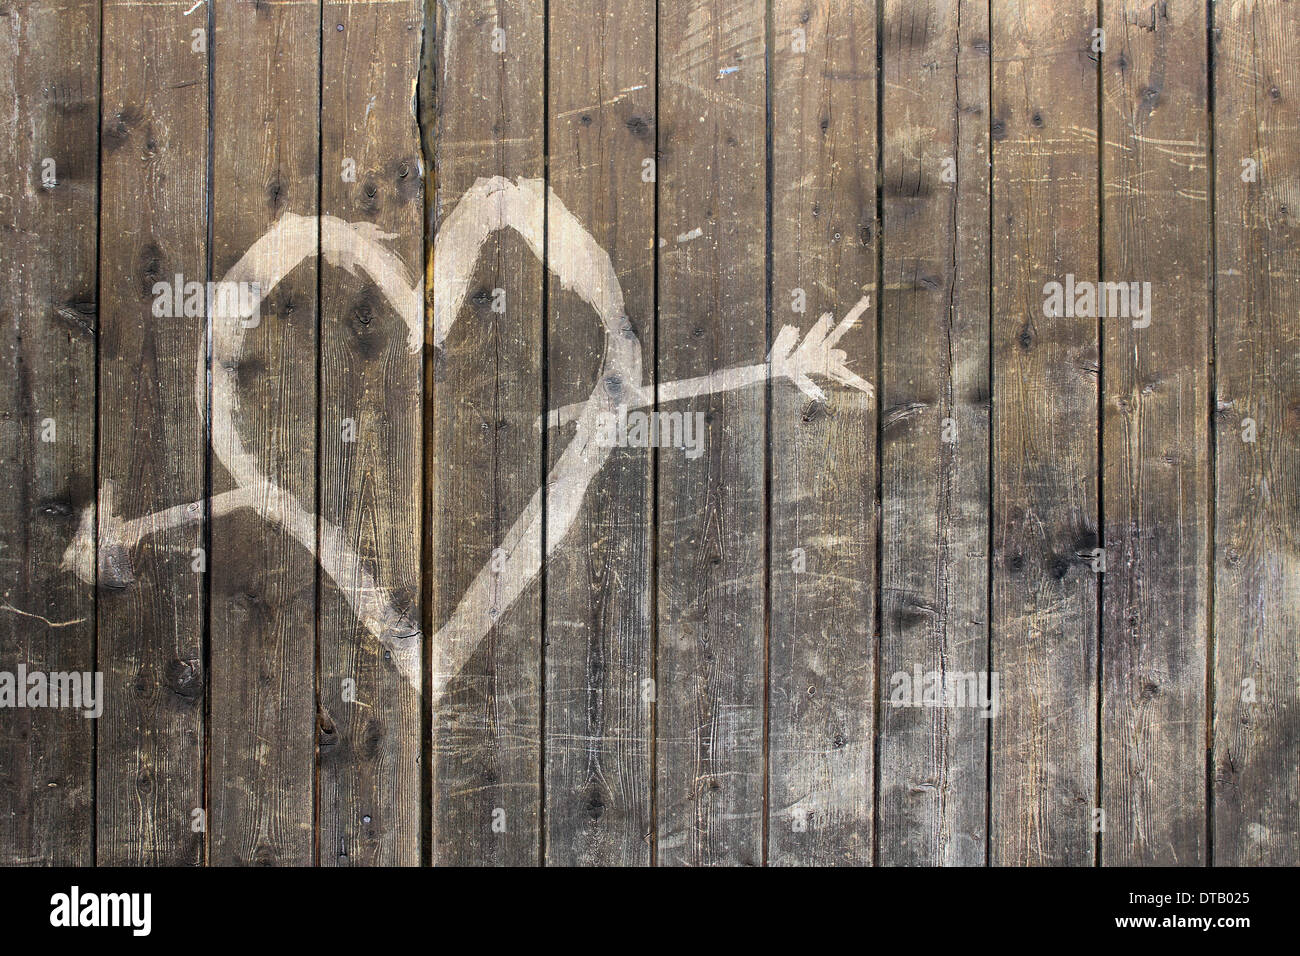 Heart shape with arrow symbol on wooden fence Stock Photo